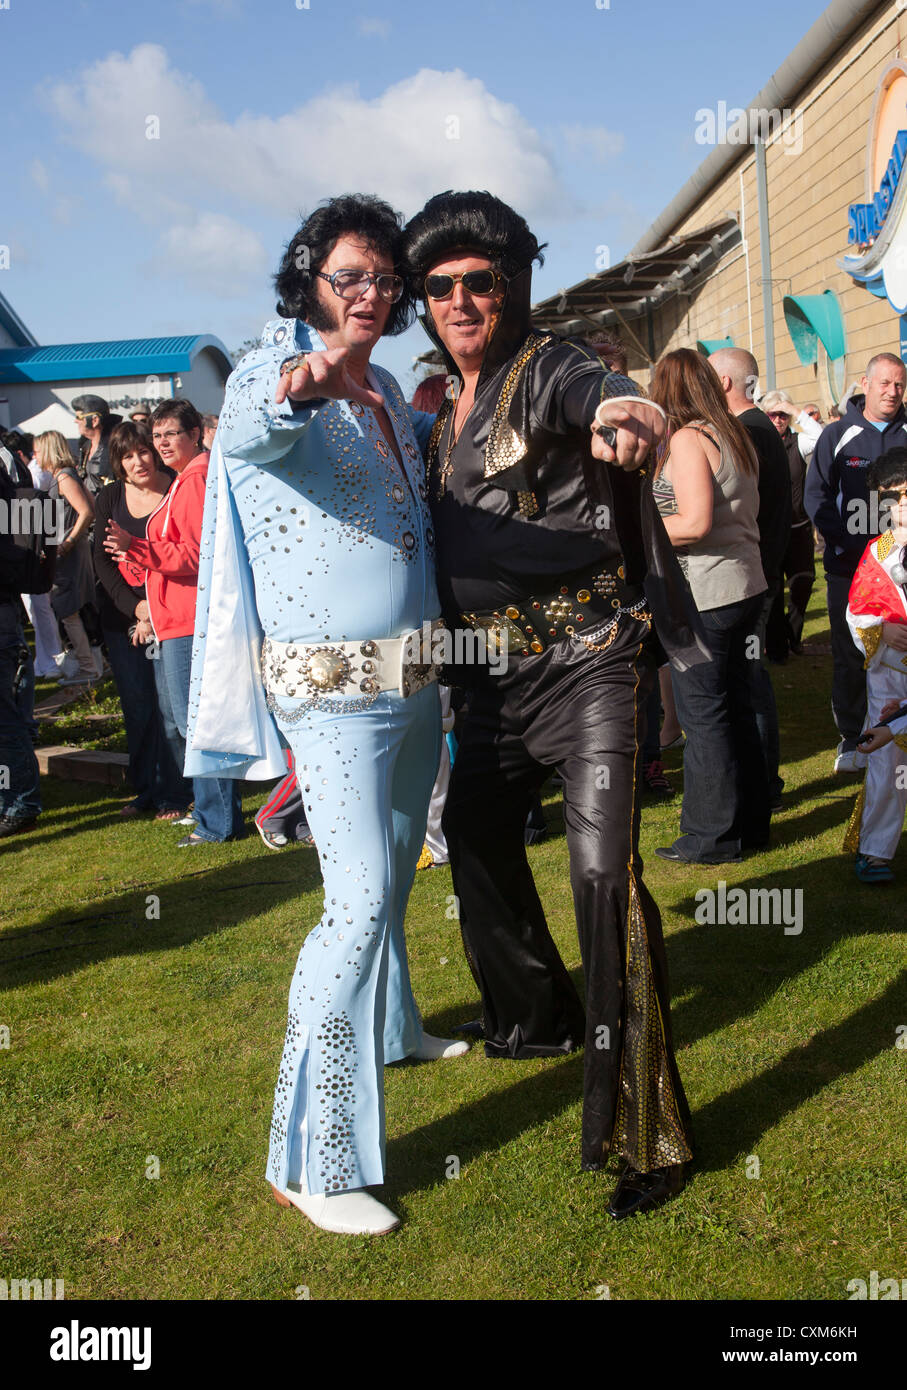 Elvis Fest - The Annual Elvis Presley Tribute Festival at Porthcawl South Wales Stock Photo